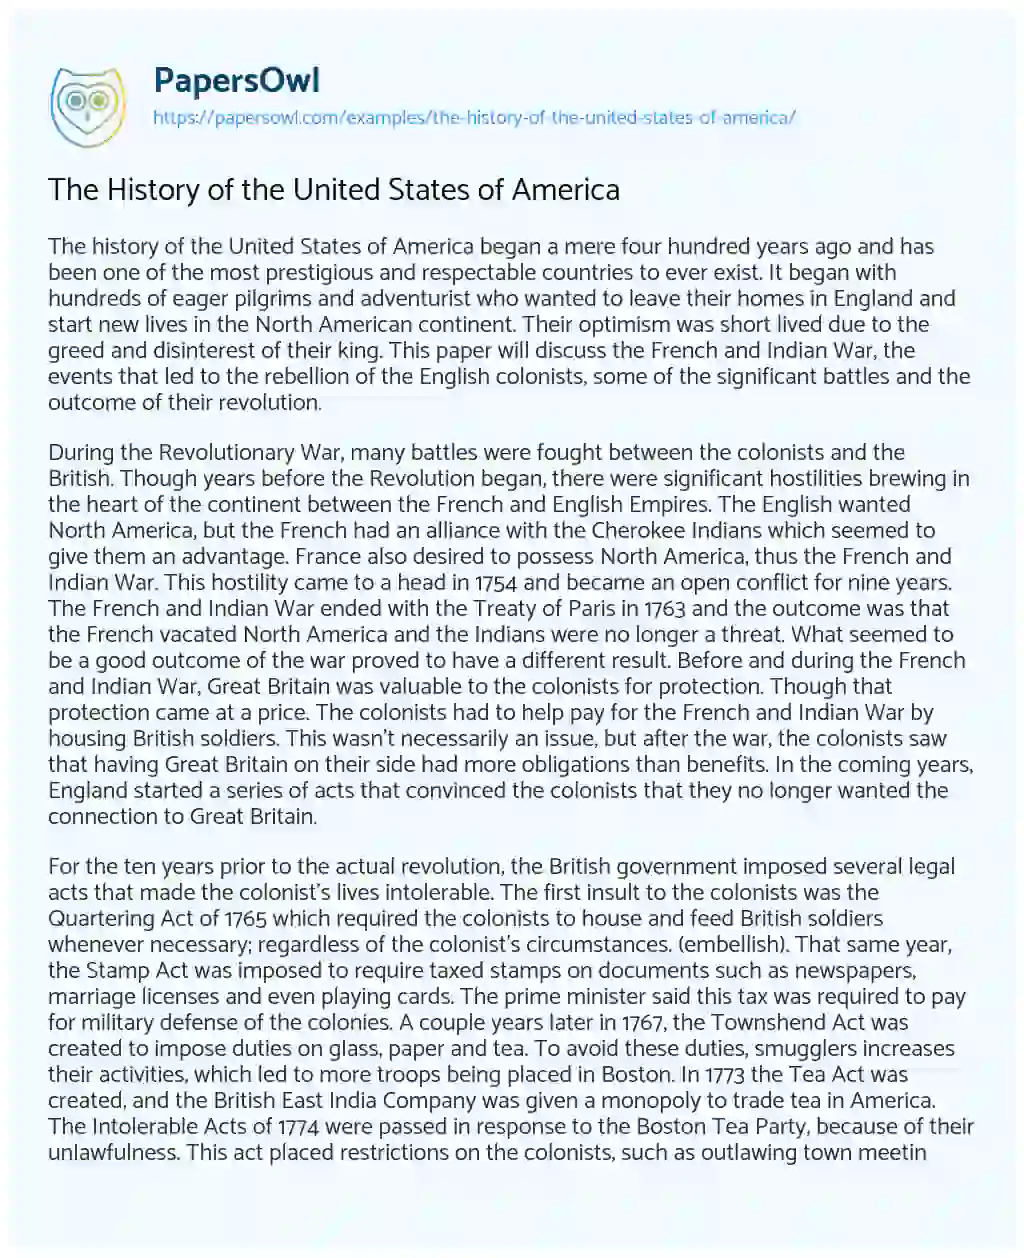 Essay on The History of the United States of America